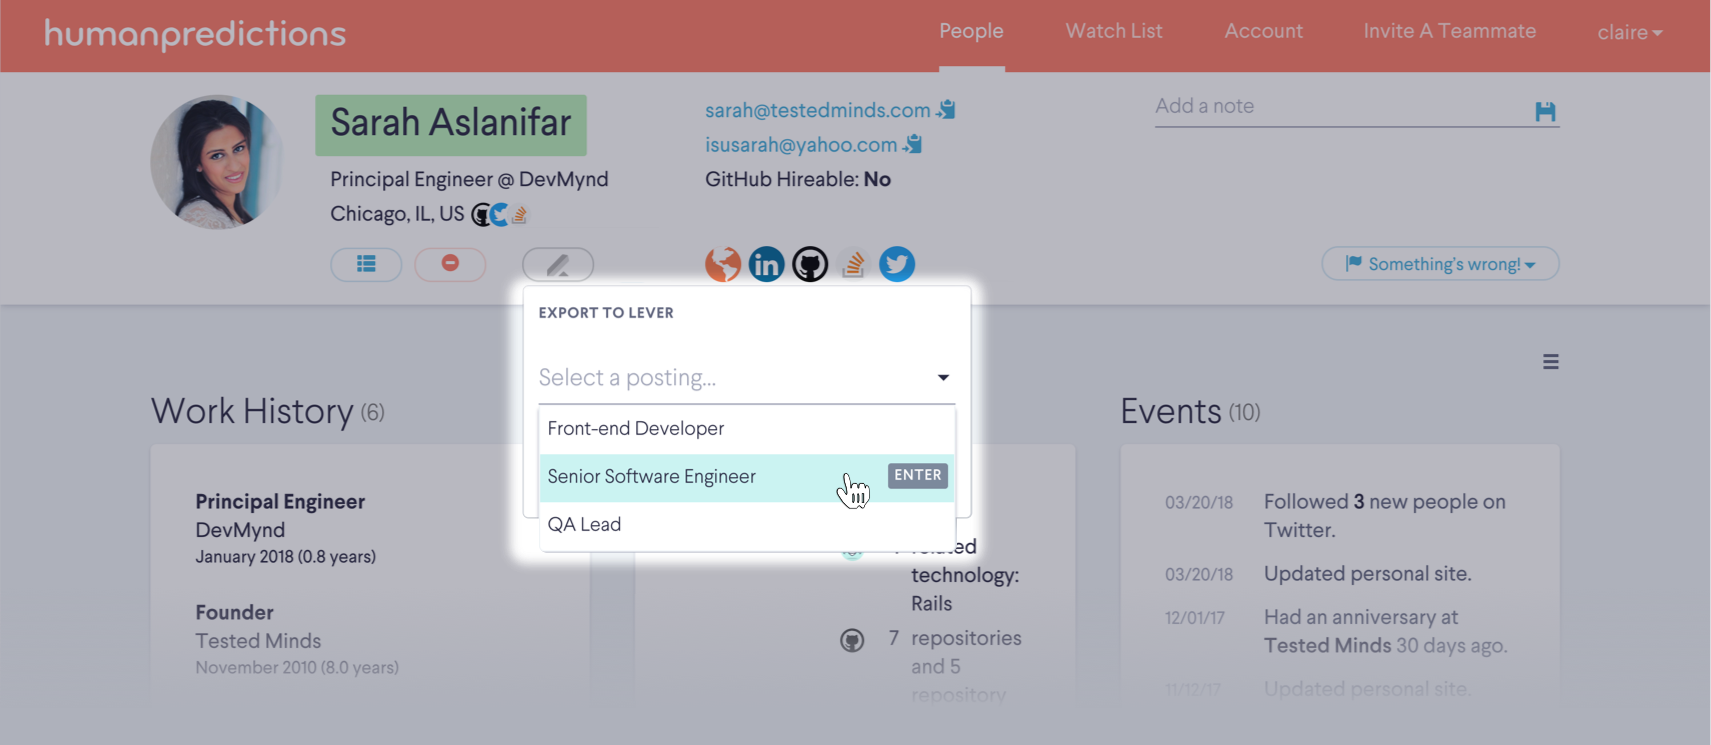 Humanpredictions platform showing candidate profile with lever button dropdown showing list of postings